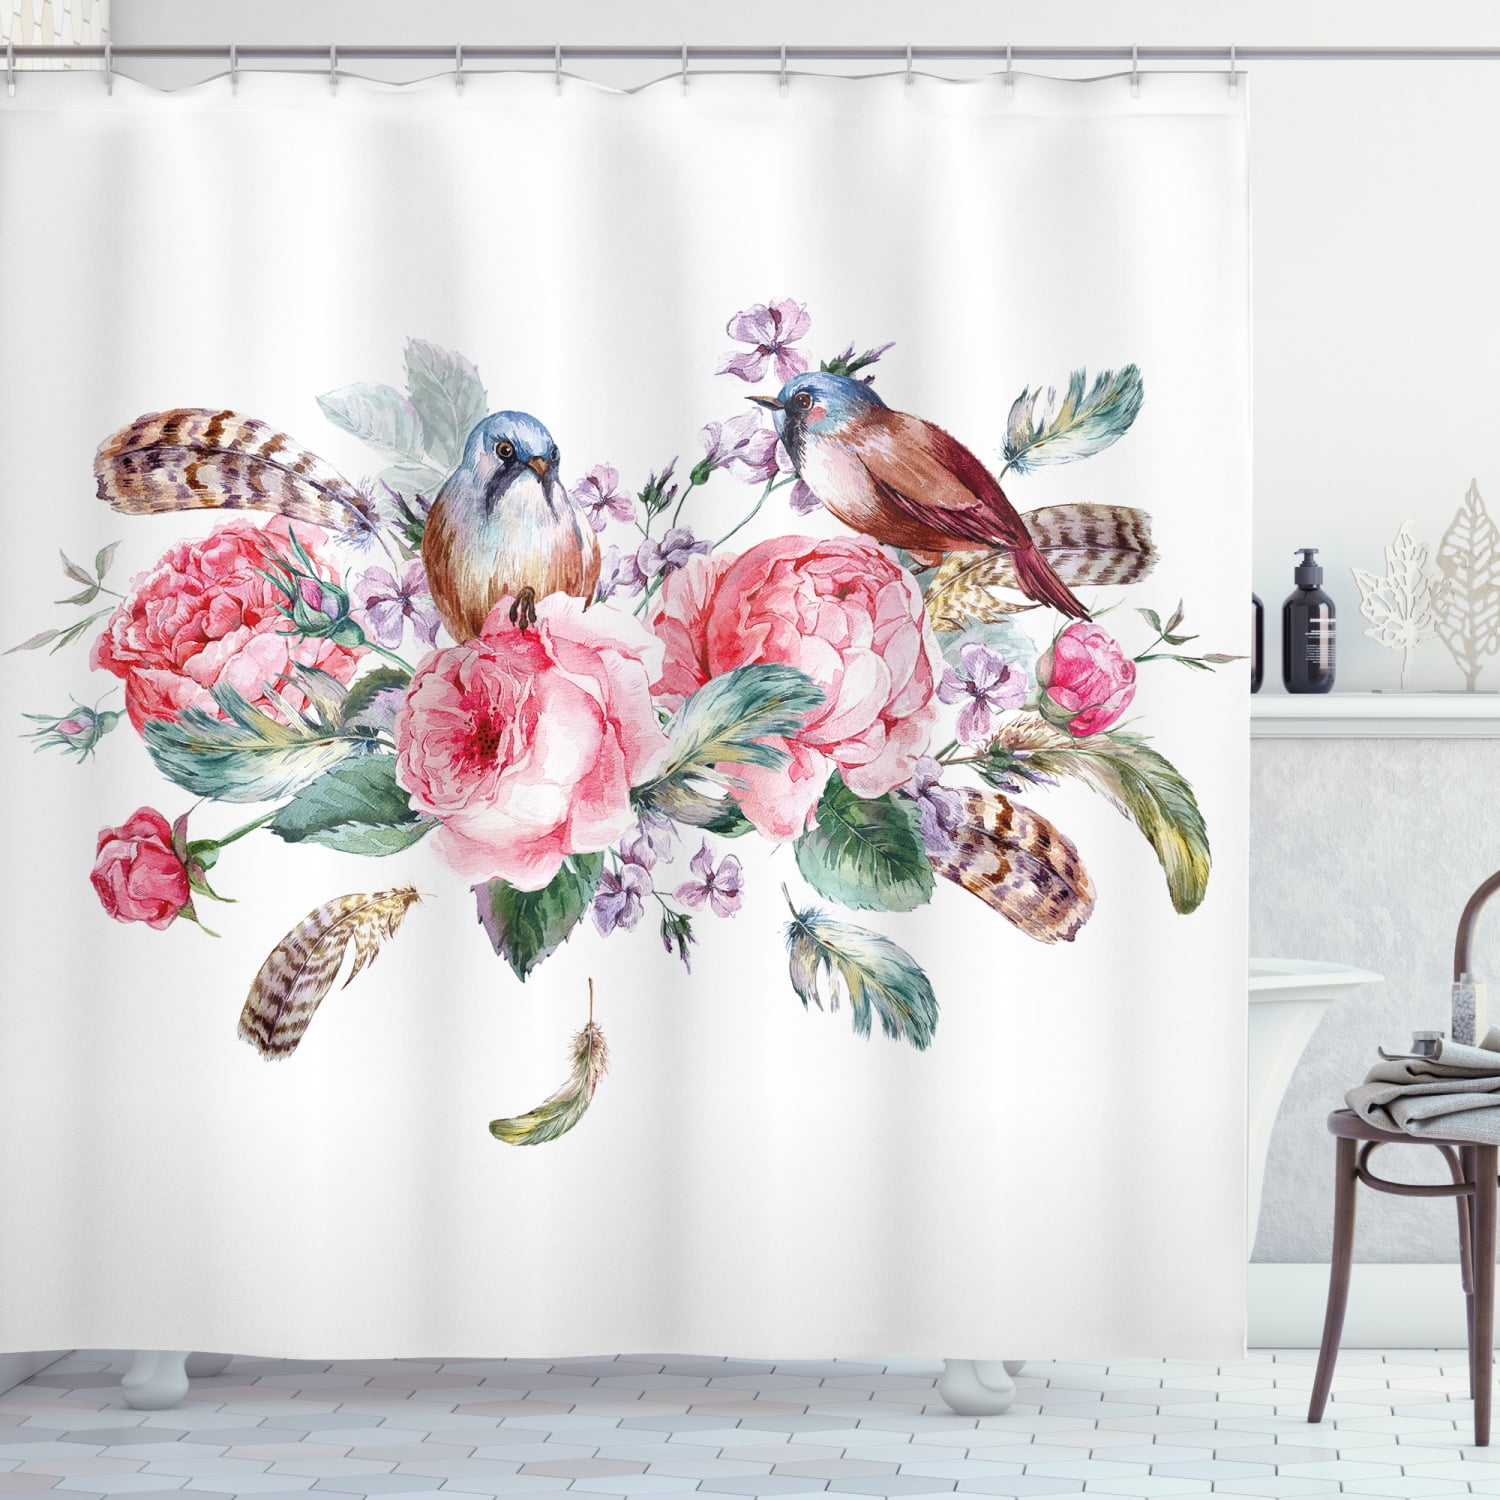 Shower Curtain Parrot Parrots Observing The World on Top of Floral Foliage Garden Jungle Tropic Bird Print Shower Curtains in Bathroom MulticolorW36x72L